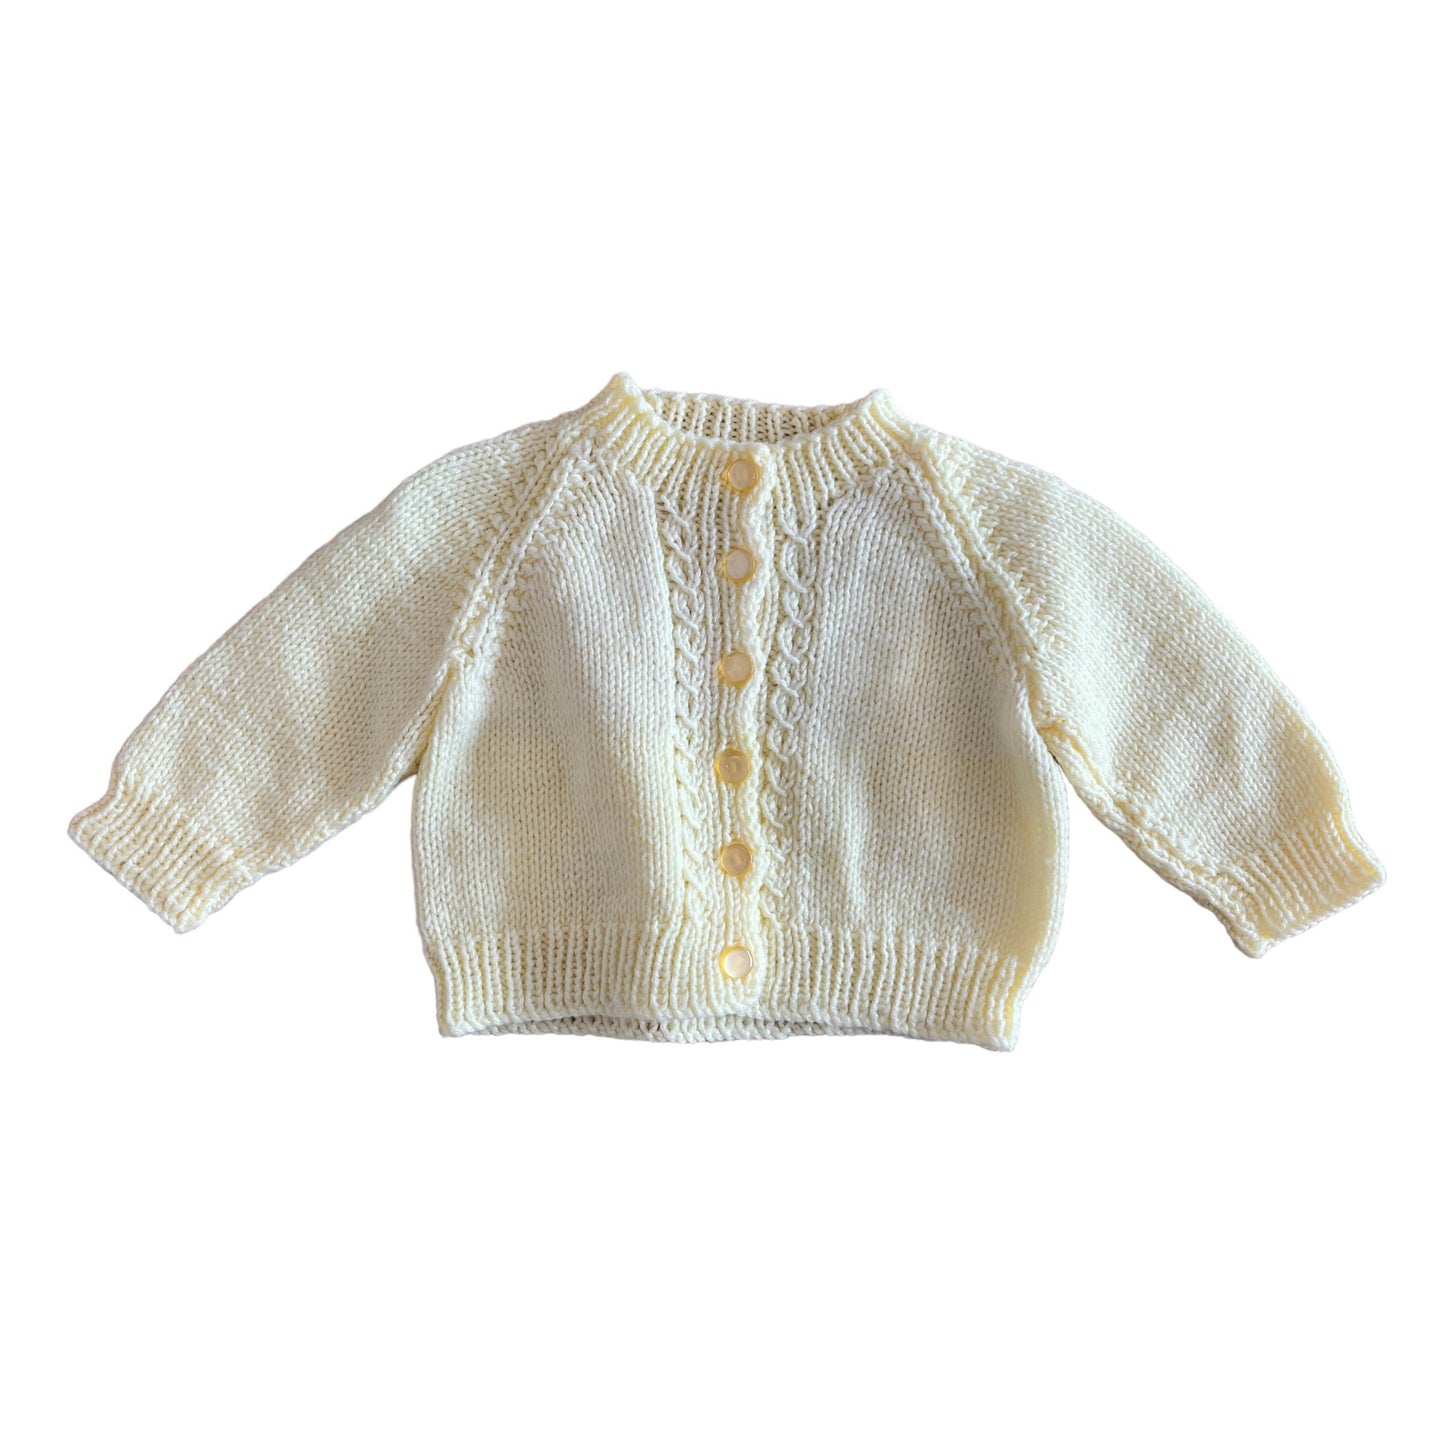 Vintage 1970's Yellow Hand Knitted Cardigan 0-3M